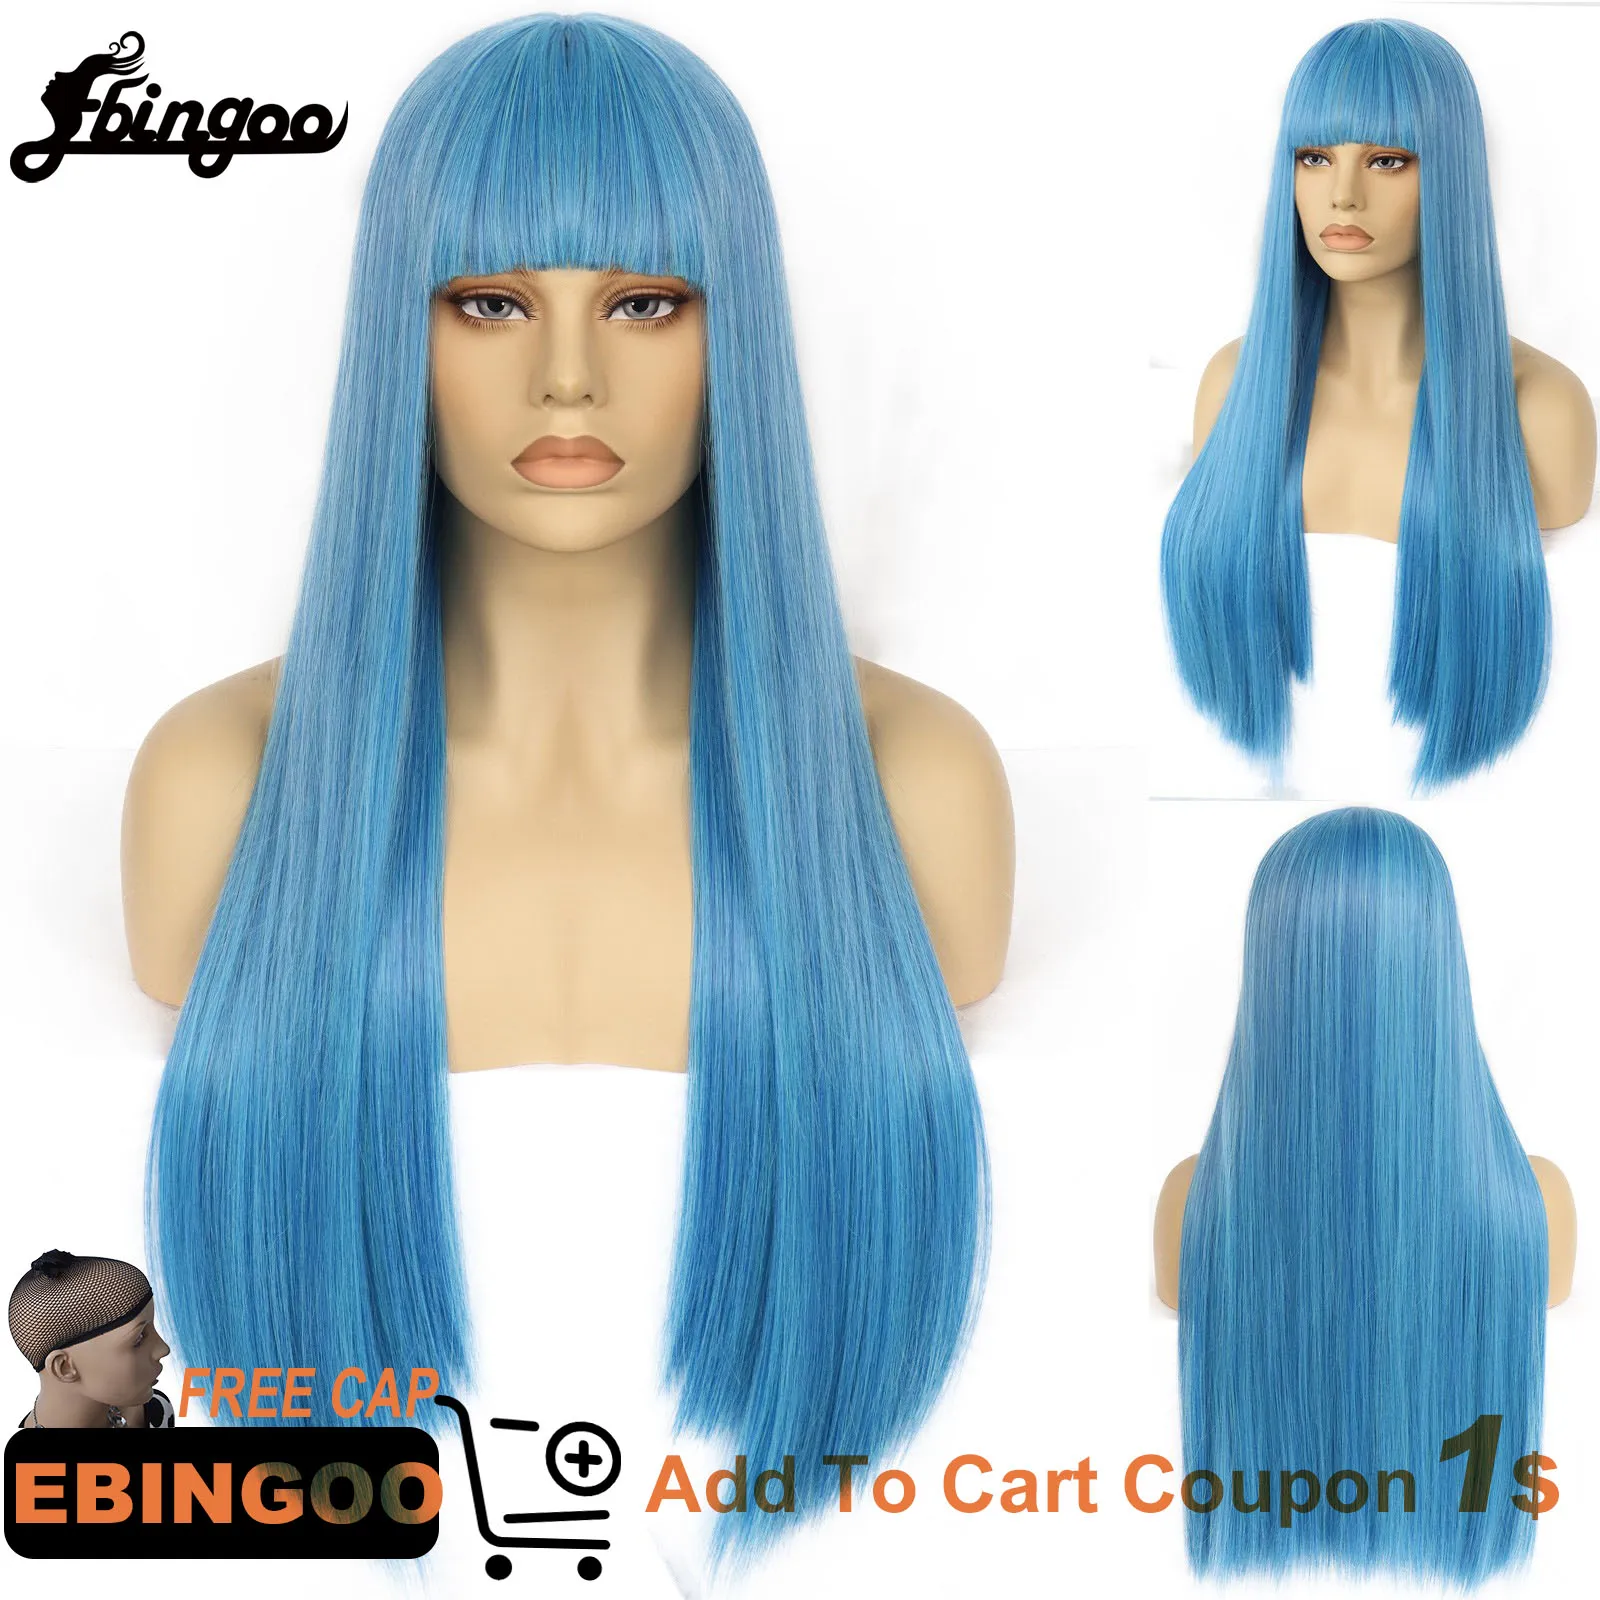 Ebingoo Synthetic 30INCH  Long Blue Wig with Bangs Full Machine Made Hair Wigs Heat Resistant Fiber Women Wig with Free Wig Cap